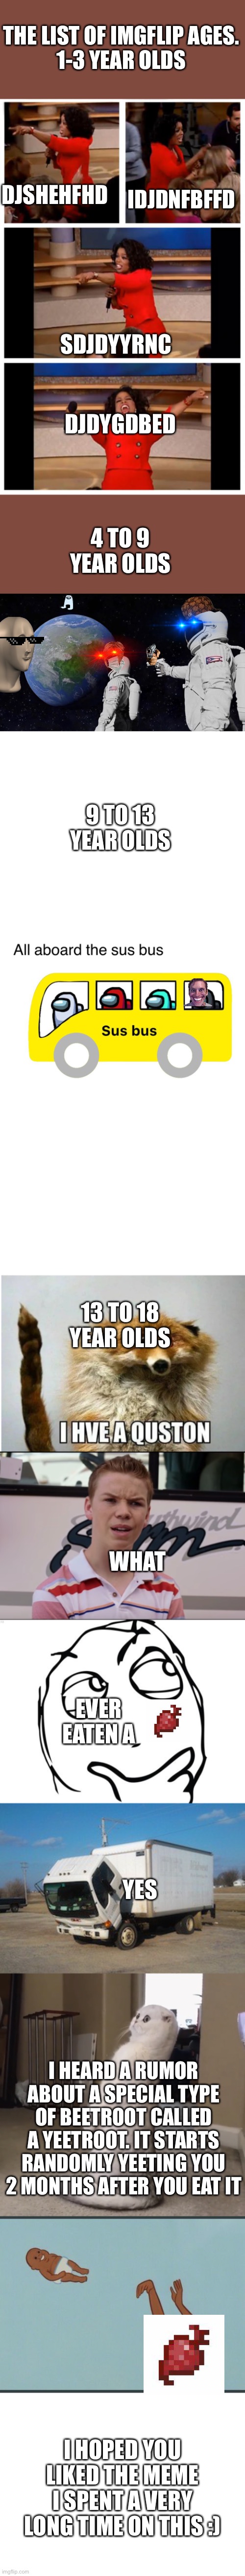 Pog i hope u like the meme | THE LIST OF IMGFLIP AGES.
1-3 YEAR OLDS; DJSHEHFHD; IDJDNFBFFD; SDJDYYRNC; DJDYGDBED; 4 TO 9 YEAR OLDS; 9 TO 13 YEAR OLDS; 13 TO 18 YEAR OLDS; WHAT; EVER EATEN A; YES; I HEARD A RUMOR ABOUT A SPECIAL TYPE OF BEETROOT CALLED A YEETROOT. IT STARTS RANDOMLY YEETING YOU 2 MONTHS AFTER YOU EAT IT; I HOPED YOU LIKED THE MEME I SPENT A VERY LONG TIME ON THIS :) | image tagged in memes,oprah you get a car everybody gets a car,always has been,blank white template,sus bus,i hve a quston | made w/ Imgflip meme maker